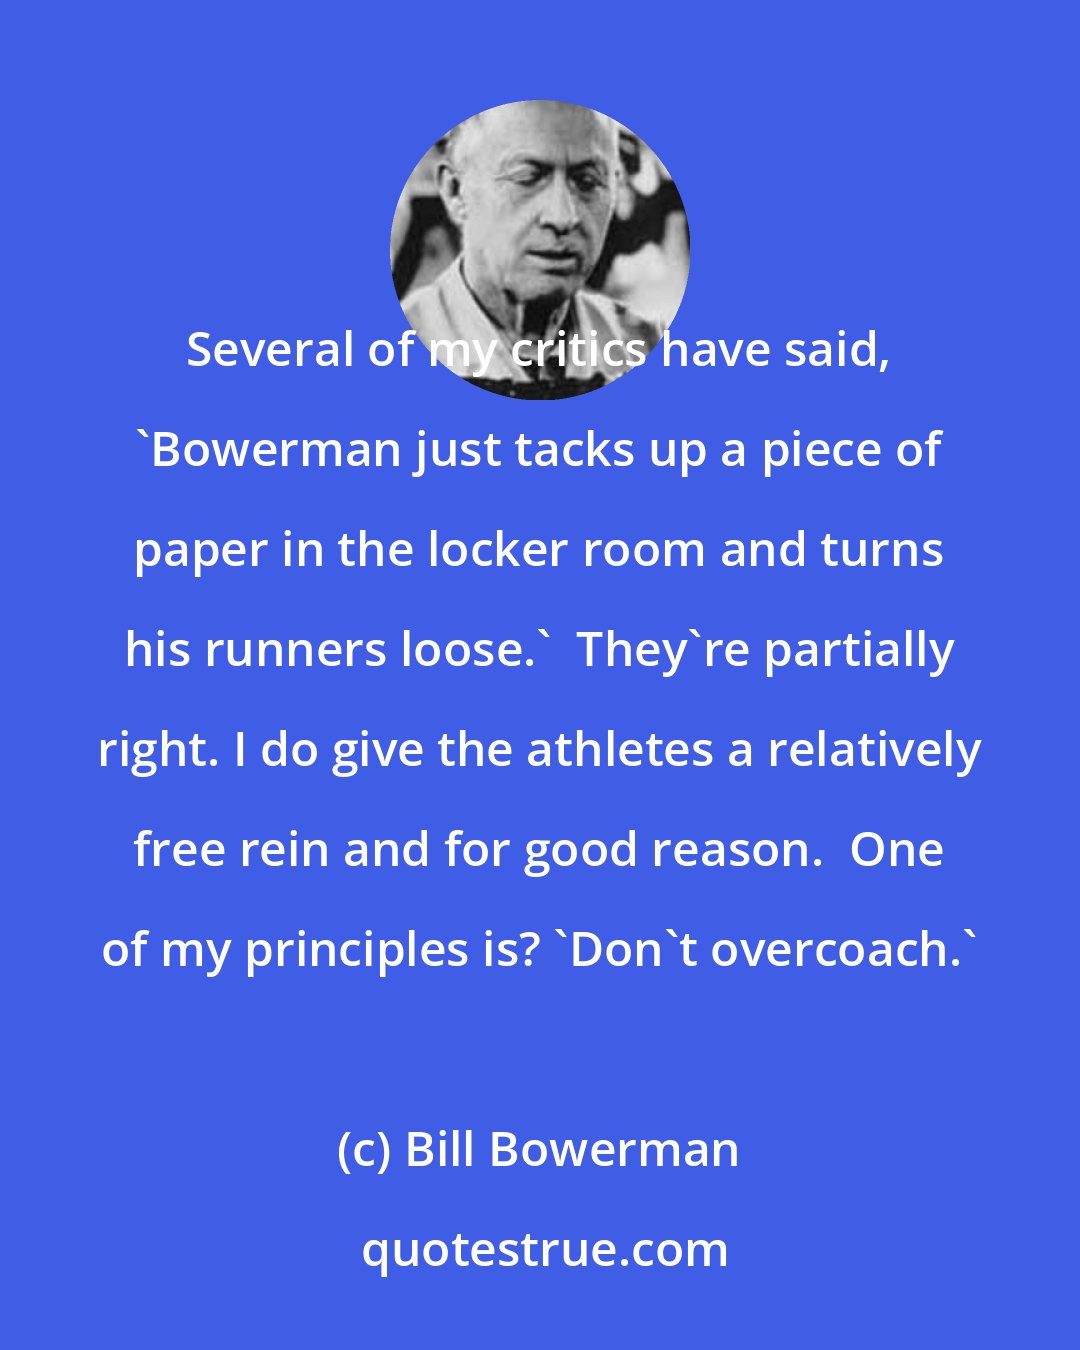 Bill Bowerman: Several of my critics have said, 'Bowerman just tacks up a piece of paper in the locker room and turns his runners loose.'  They're partially right. I do give the athletes a relatively free rein and for good reason.  One of my principles is? 'Don't overcoach.'